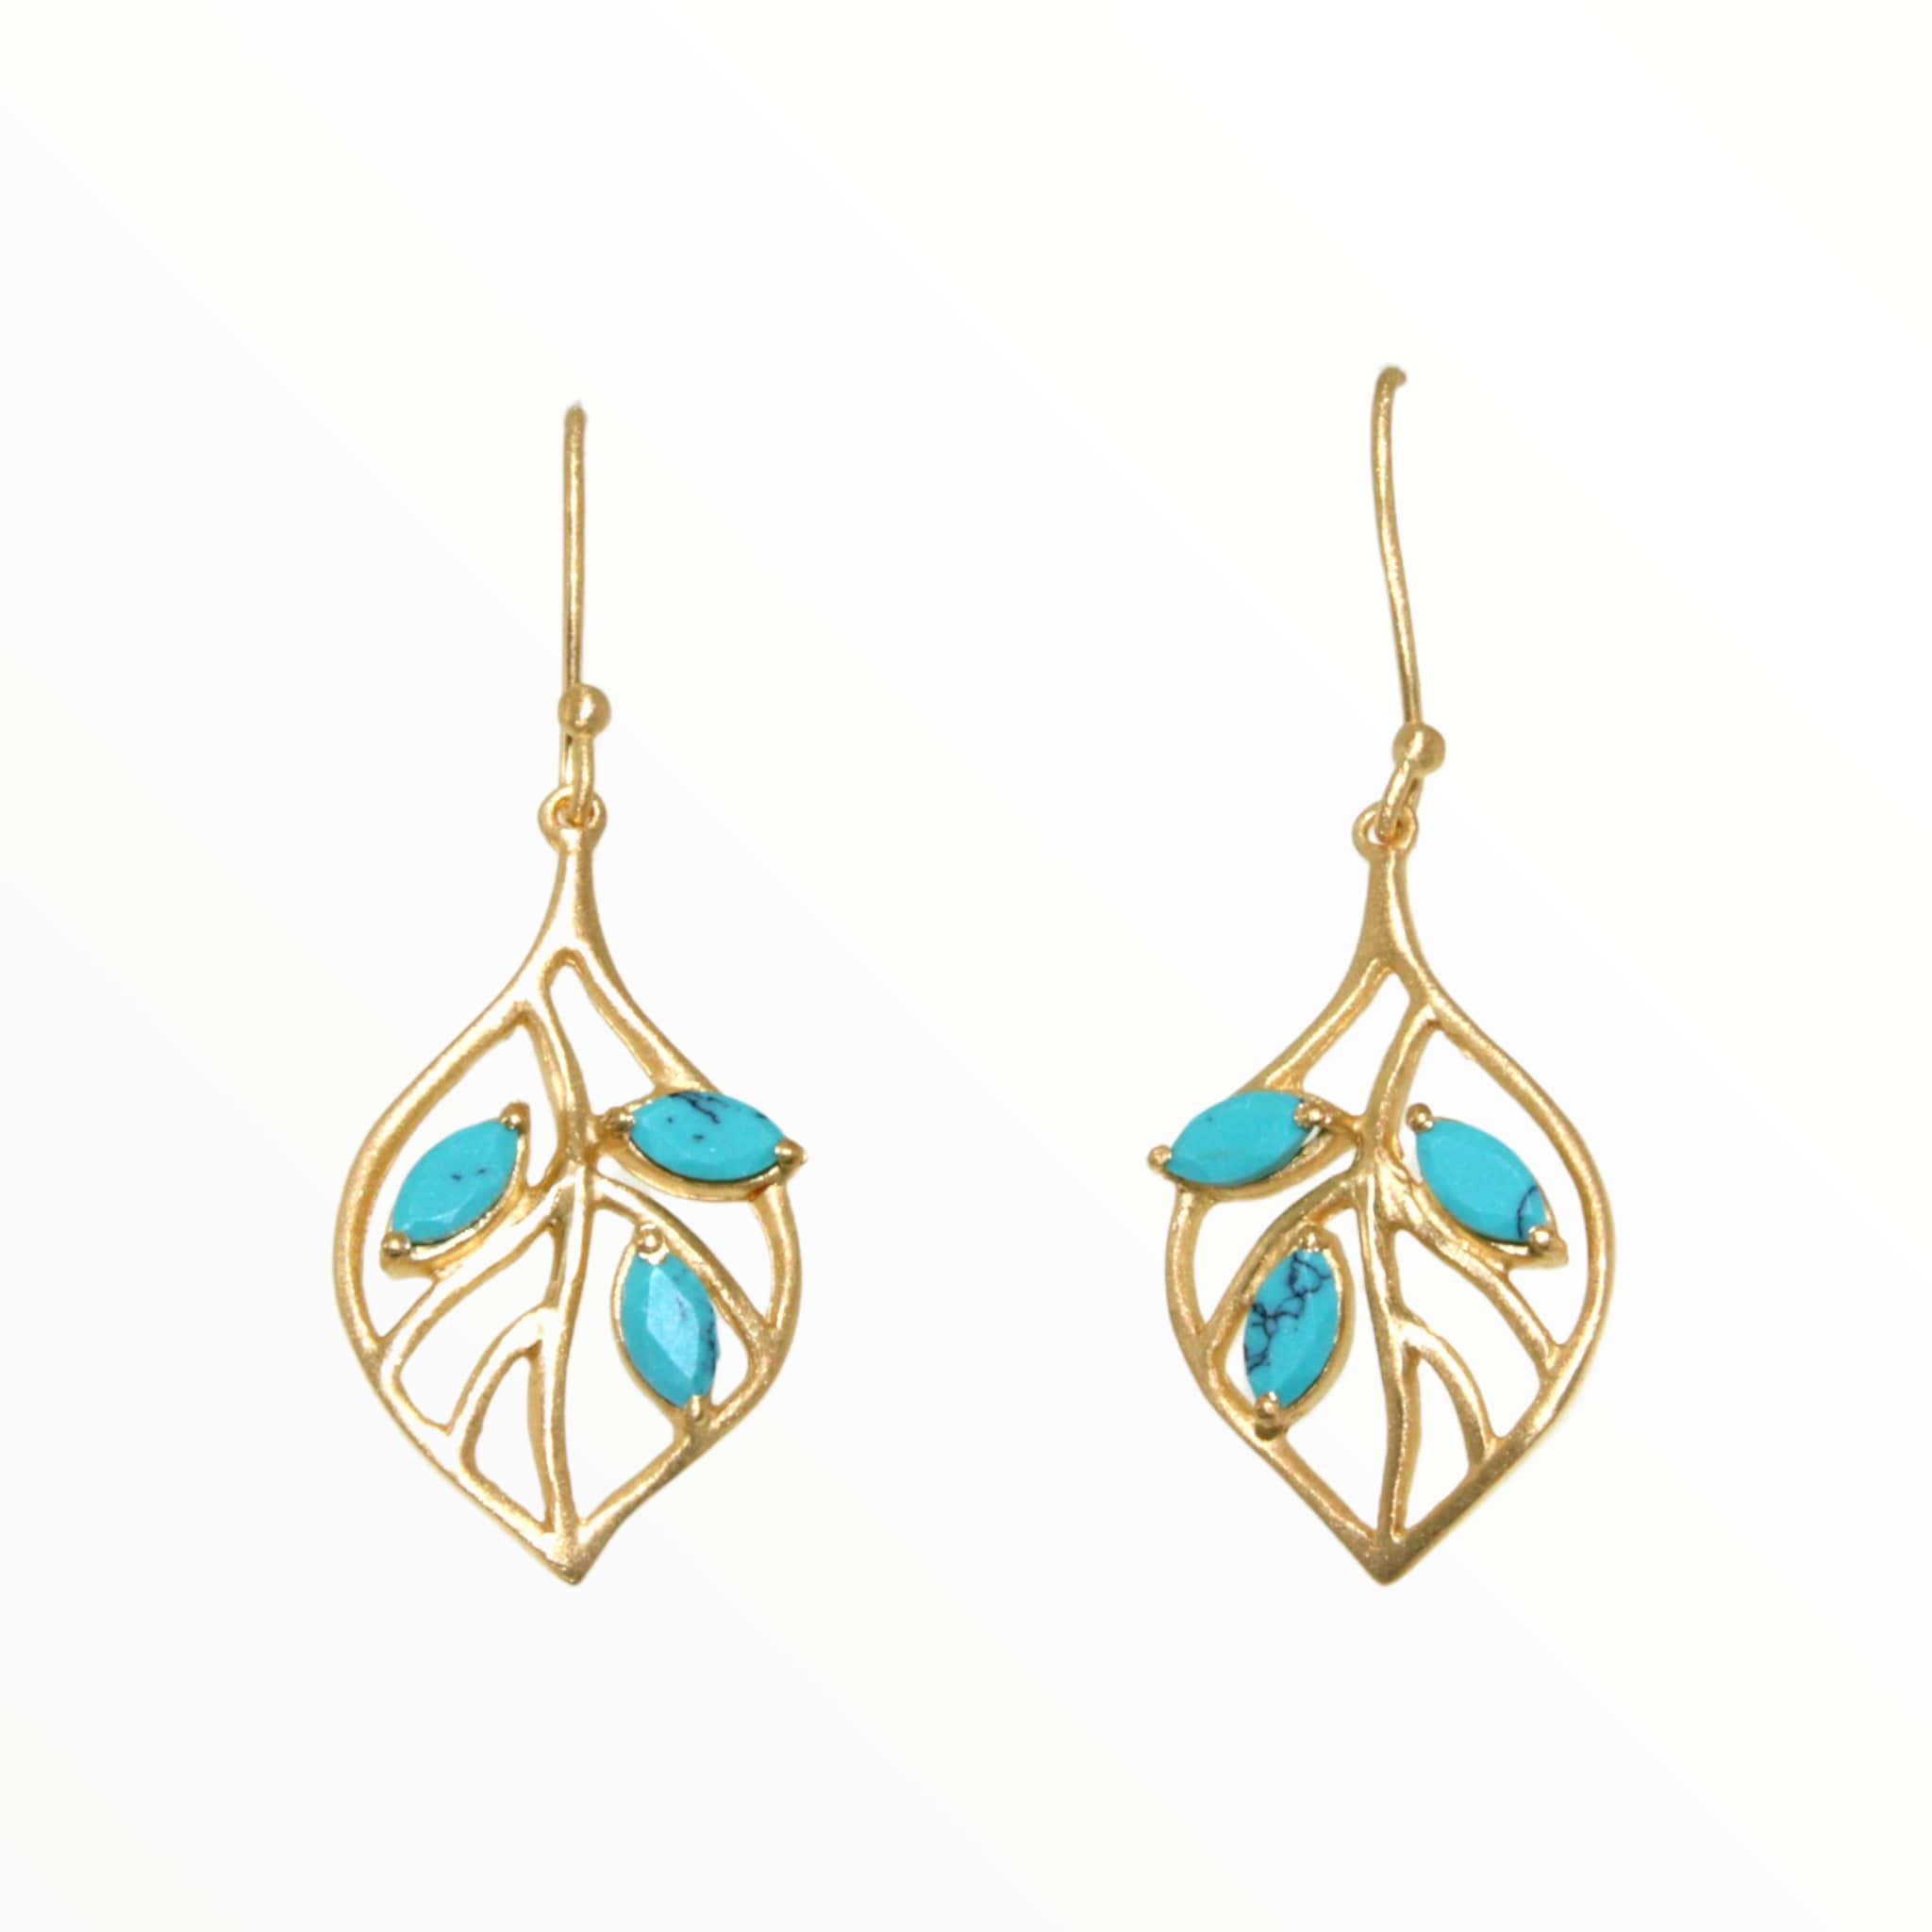 Gold Feather With Turquoise Semi Precious Stone Earrings – Shop at Goldie's